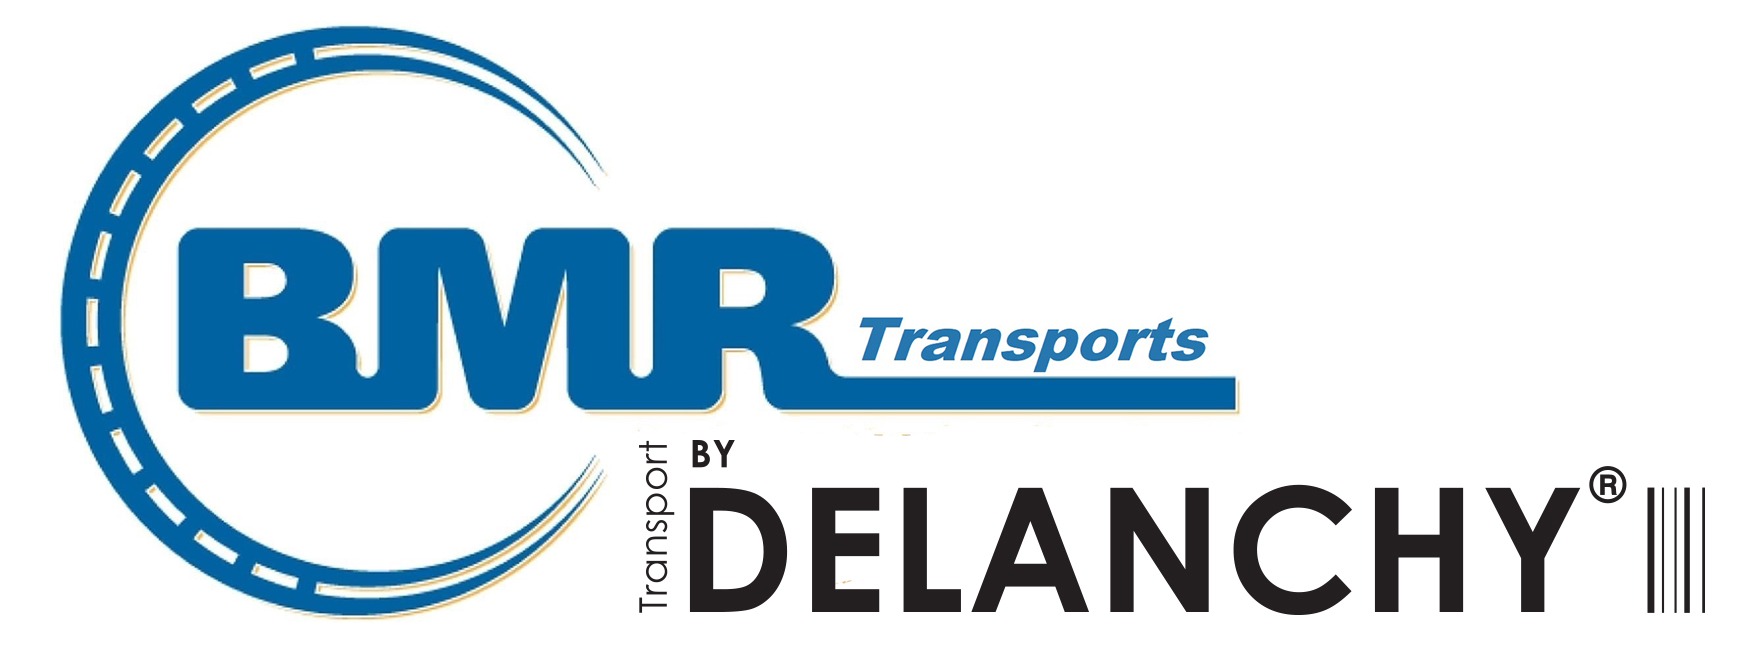 BMR Transports joins the DELANCHY Group